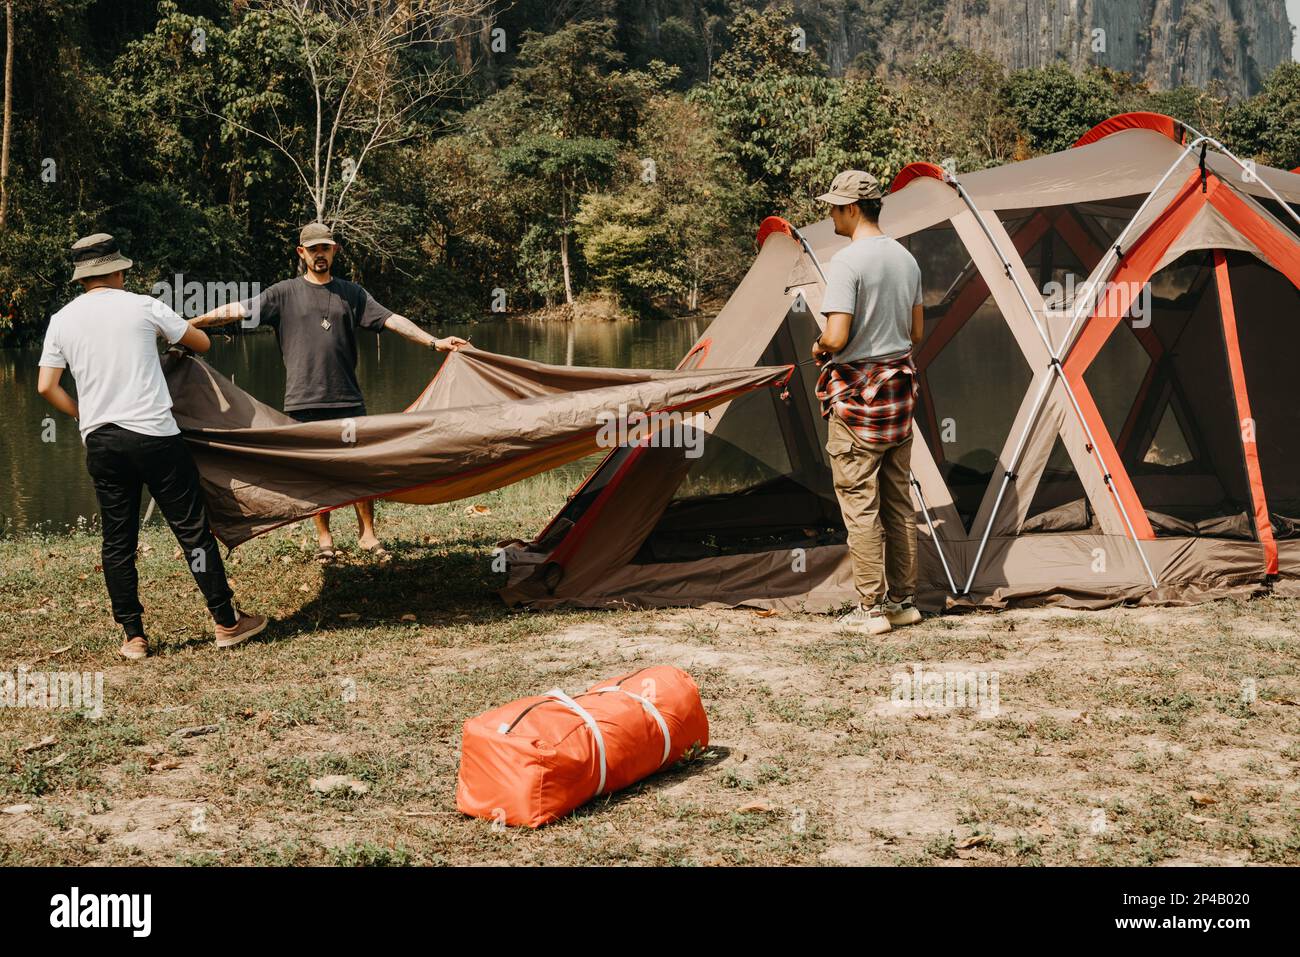 Young men help set up tents for camping. Stock Photo